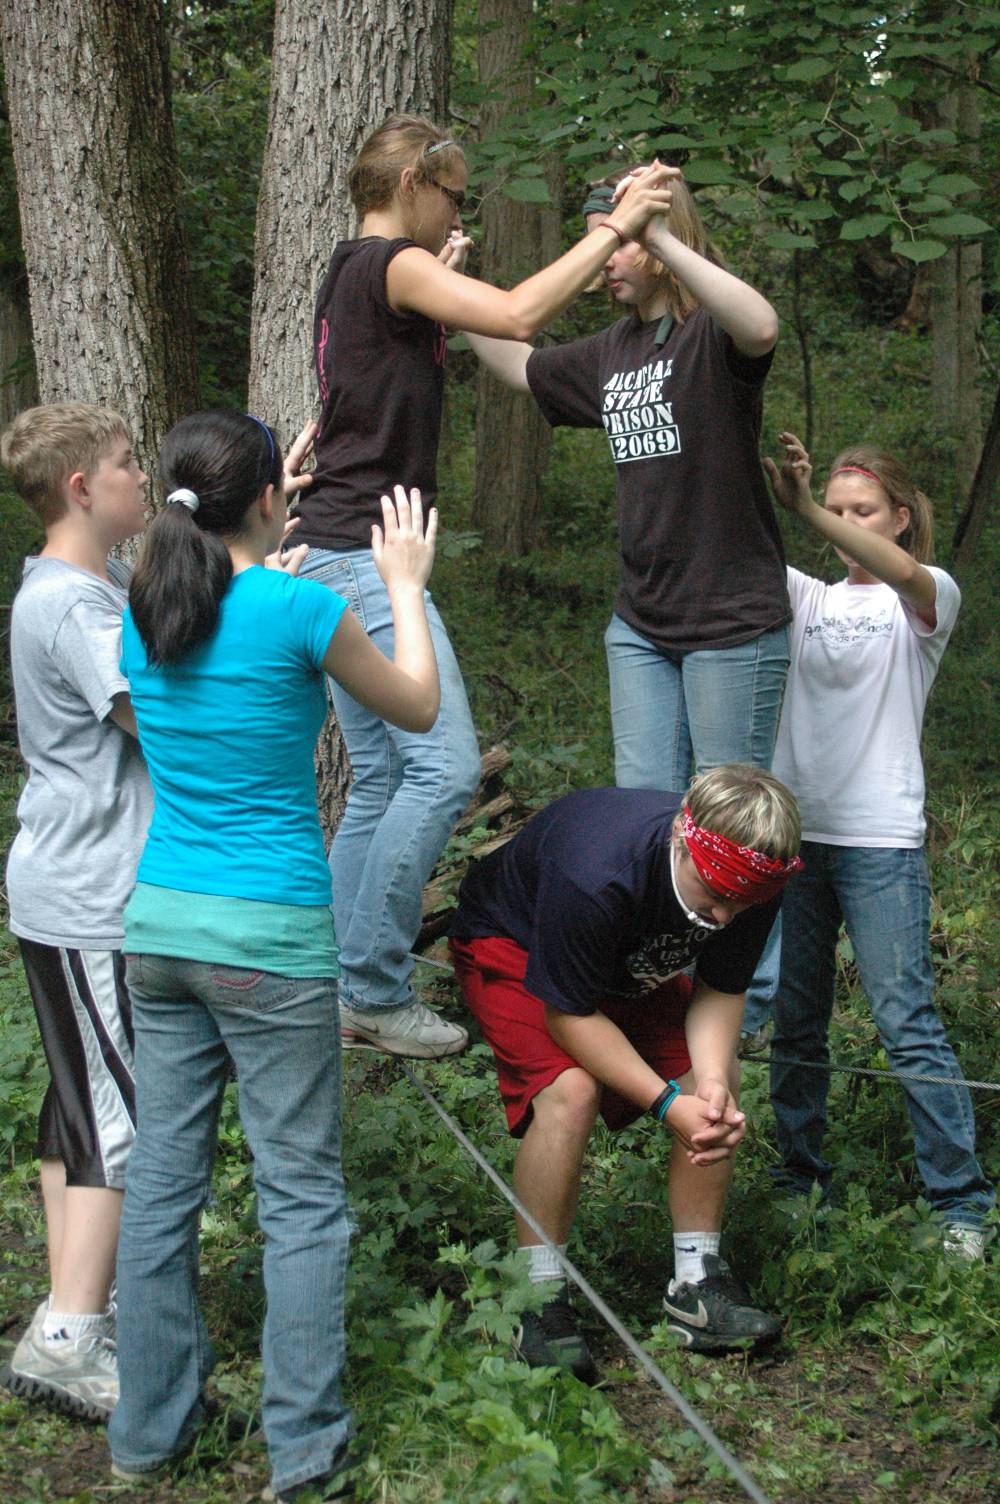 TOP IOWA MUSIC CAMP: Pilgrim Heights Camp & Retreat Center is a Top Music Summer Camp located in Montour Iowa offering many fun and enriching Music and other camp programs. Pilgrim Heights Camp & Retreat Center also offers CIT/LIT and/or Teen Leadership Opportunities, too.